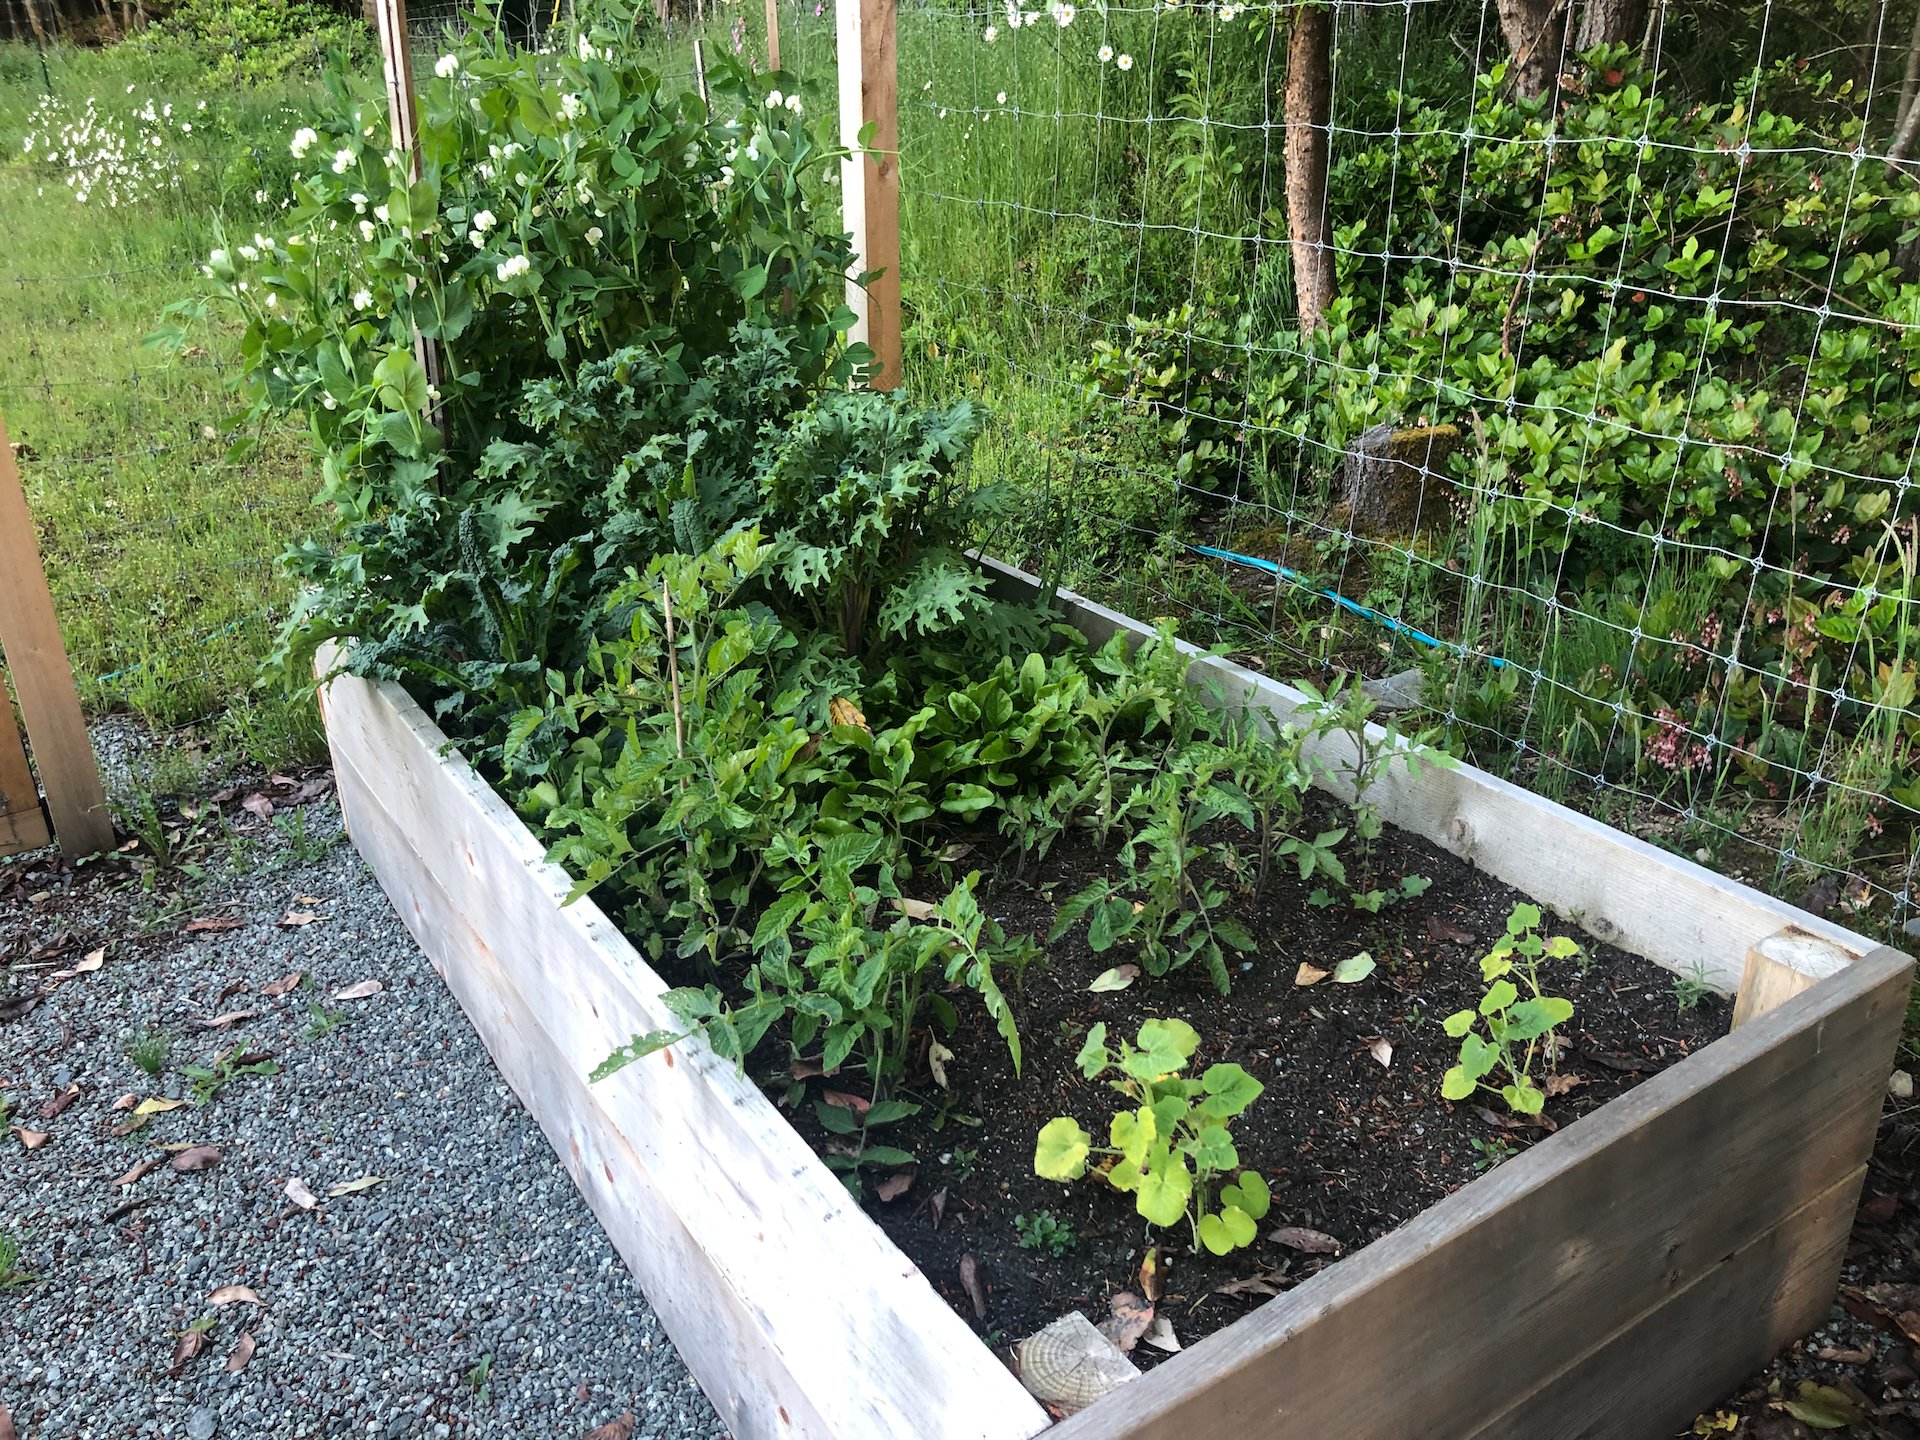  IN the other box the peas are also doing well, as is the kale. The squash are way behind where they were last year. 